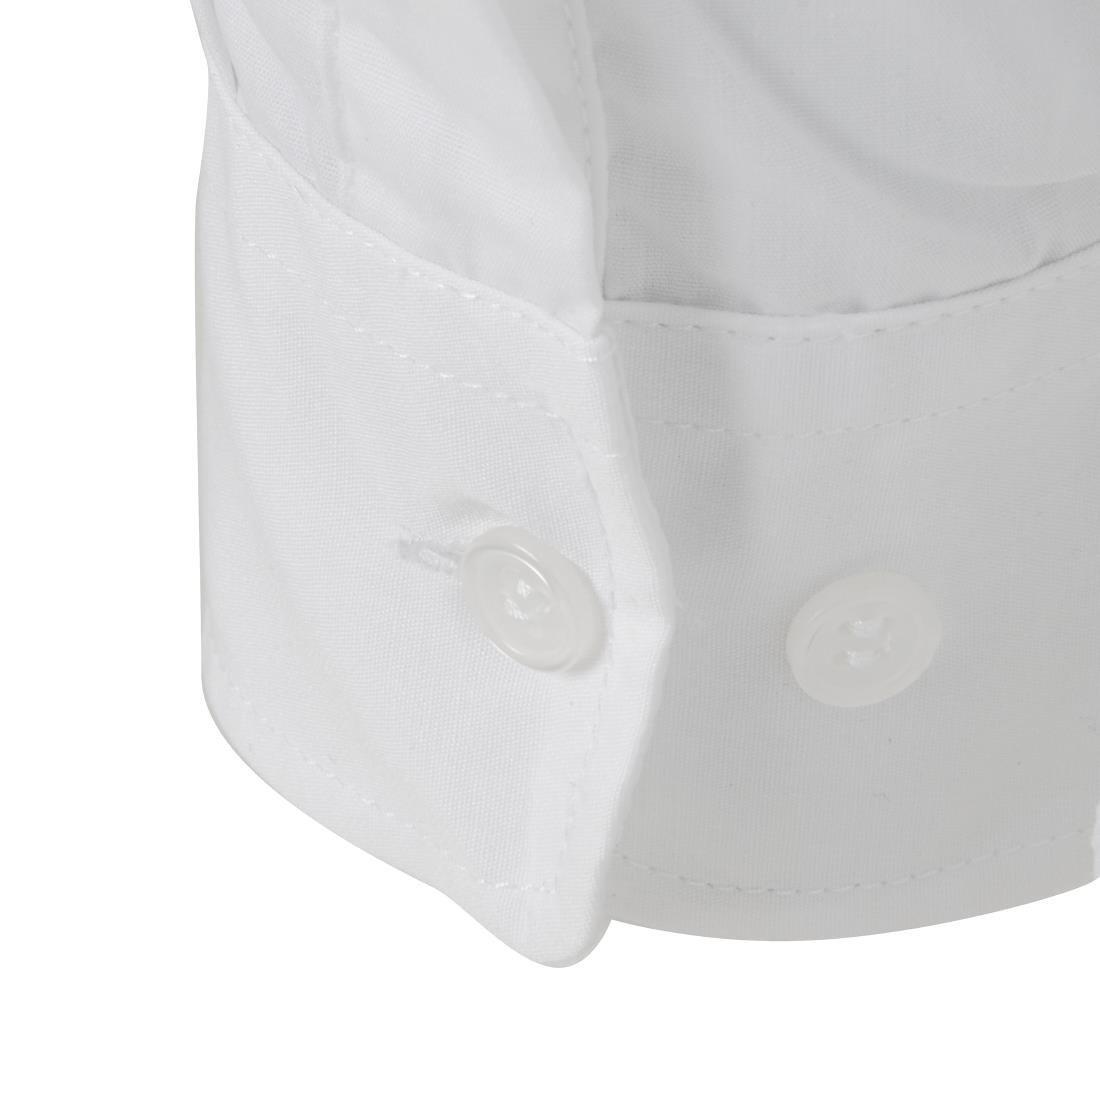 Chef Works Unisex Long Sleeve Shirt White JD Catering Equipment Solutions Ltd